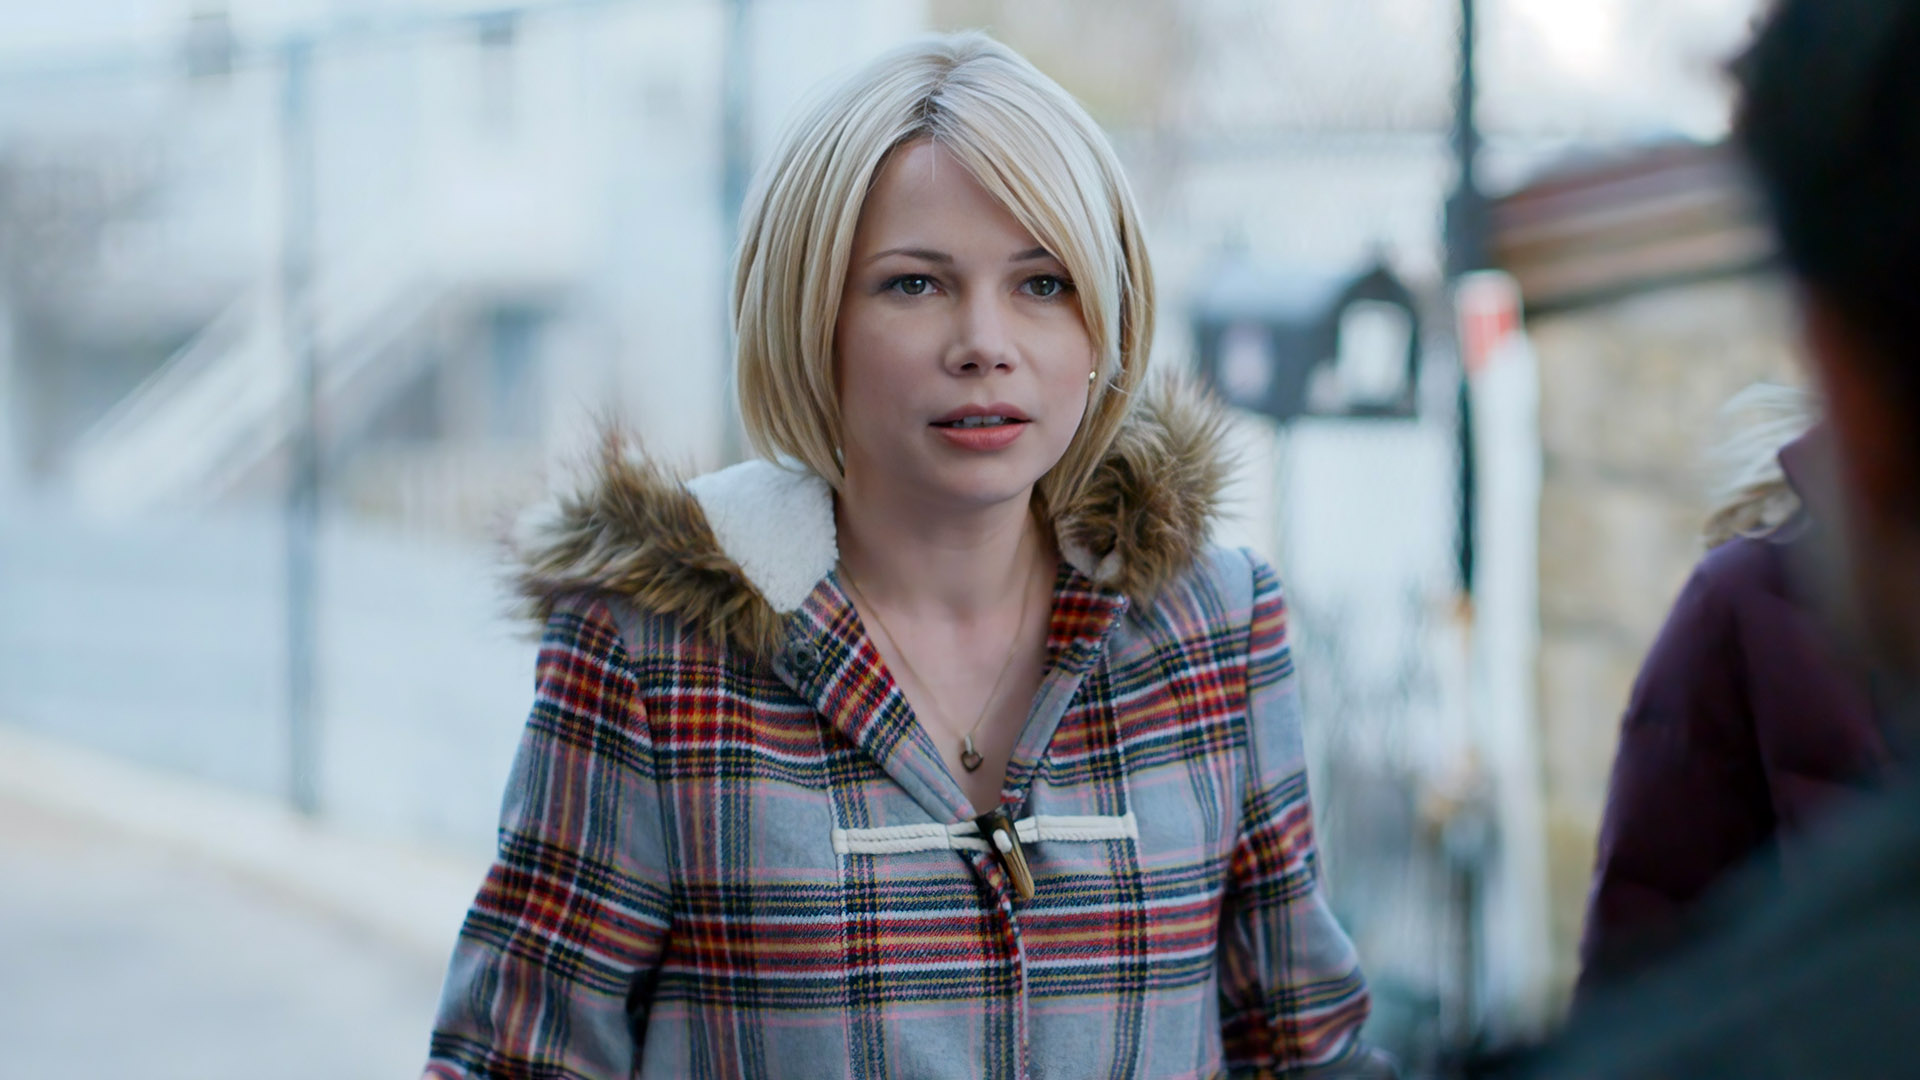 10 Underrated Michelle Williams Movies You've Probably Missed